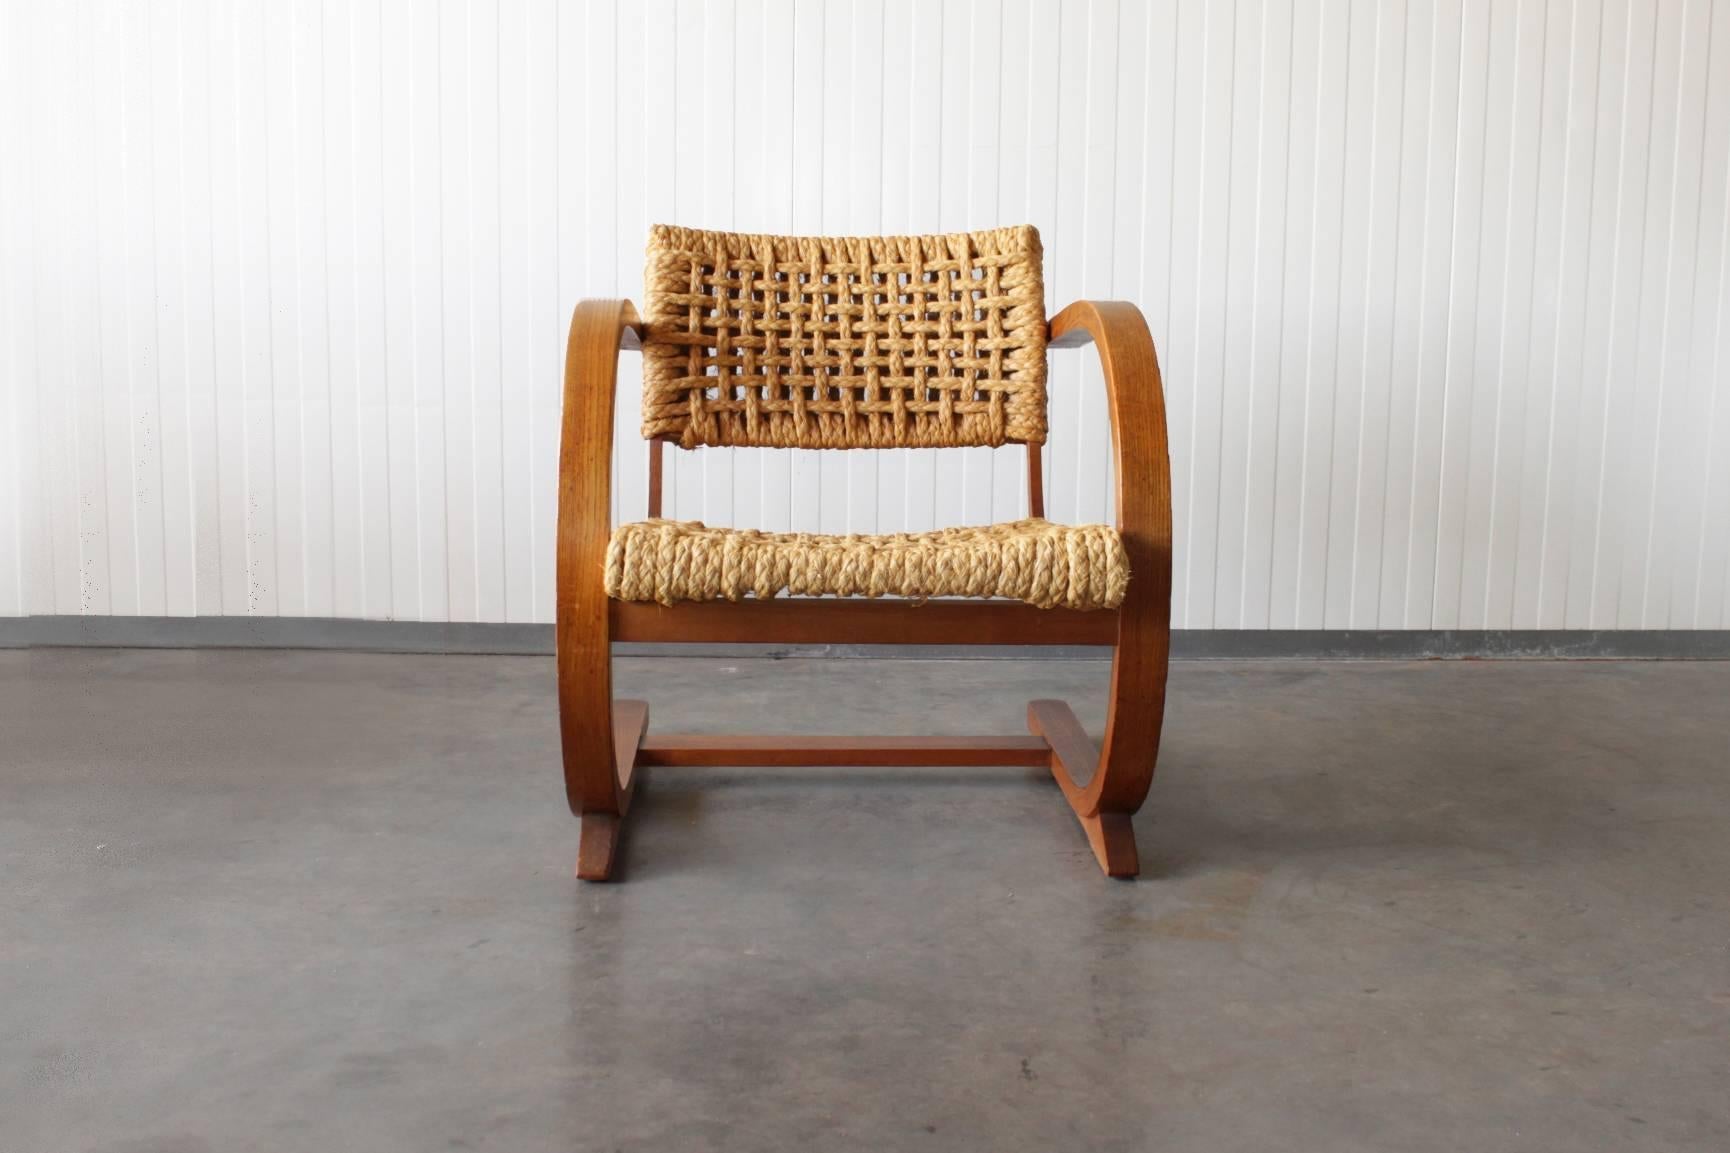 This rare armchair was designed by Dutch designer Bas Van Pelt. It was produced in the Netherlands, circa 1936. The chair features curved oak rails, including armrests and a woven raffia seat and back. 

This chair is in a very good condition and